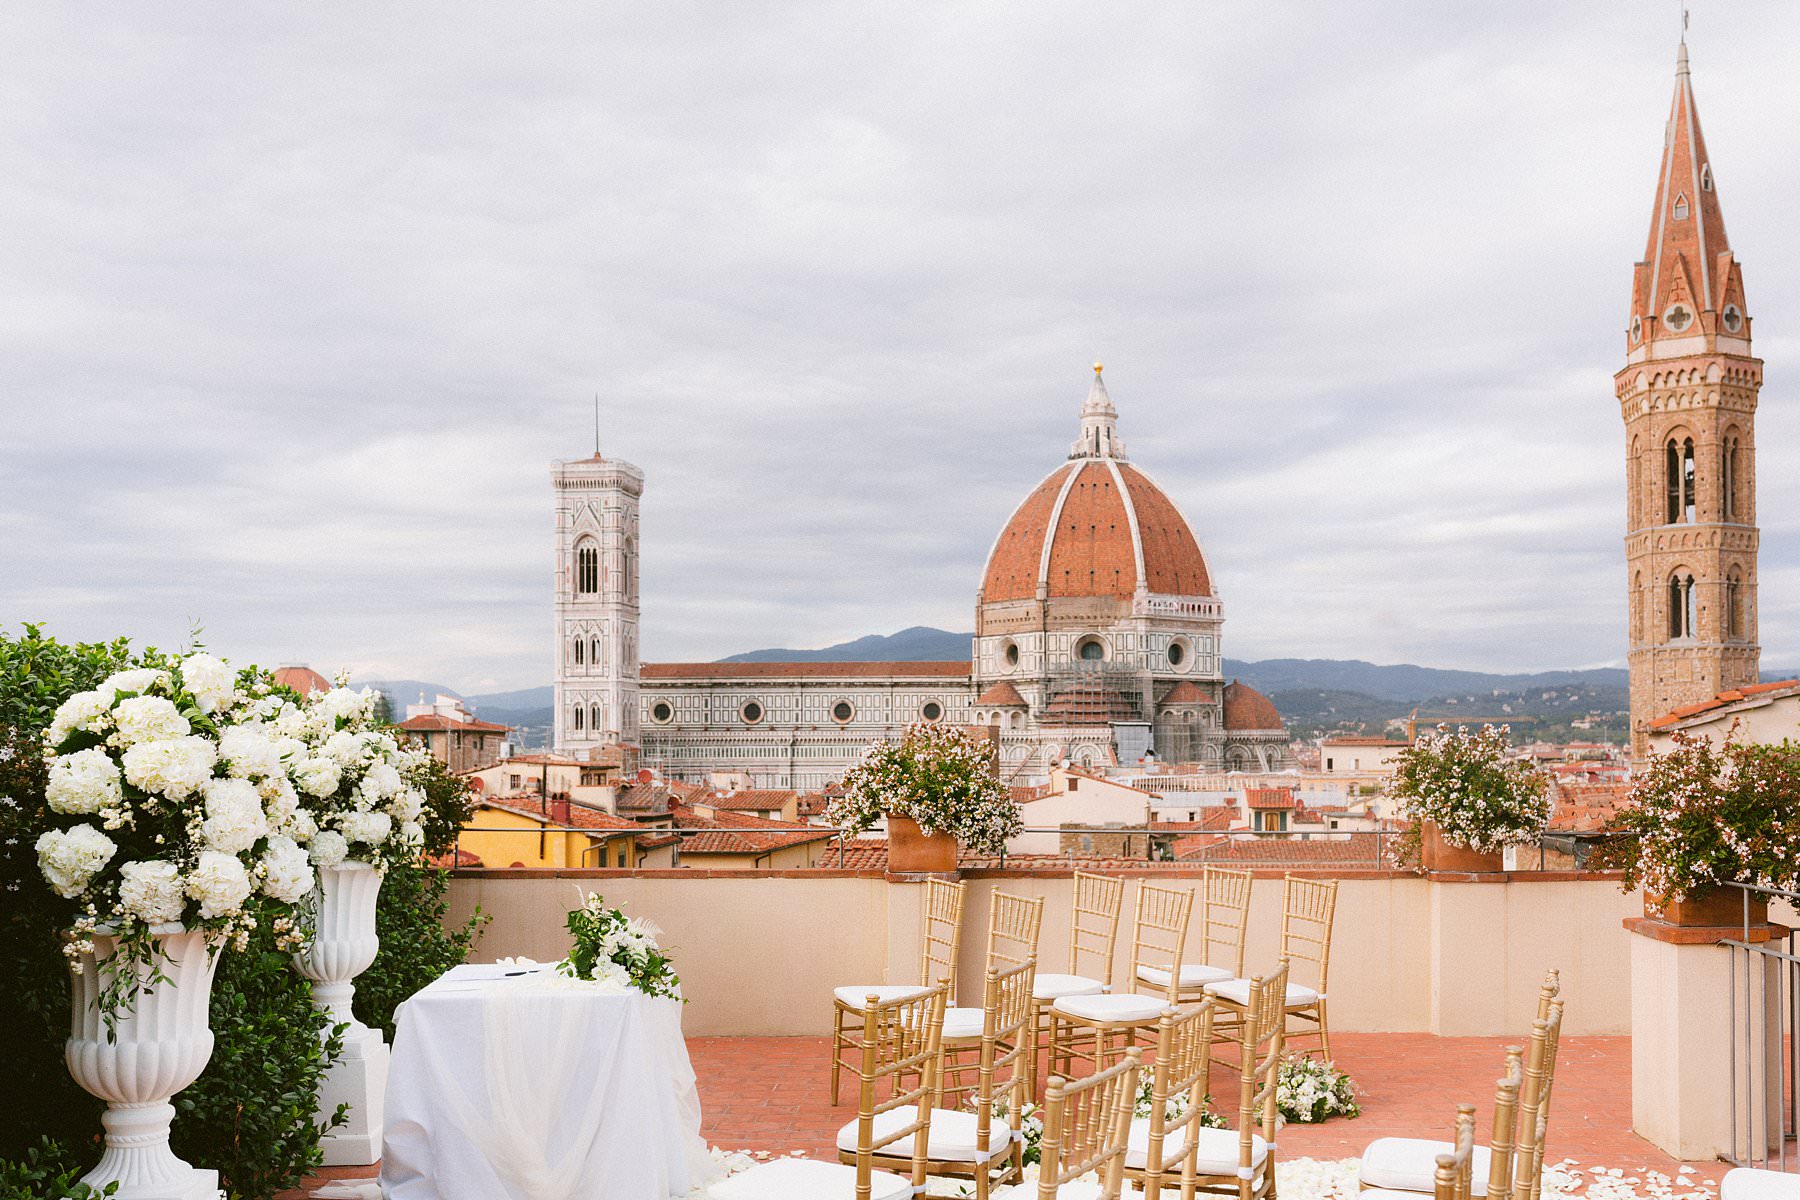 Intimate exquisite wedding in the heart of Florence, Italy. Gorgeous real wedding ceremony decors at Palazzo Gondi, one of the most renowned Renaissance palaces in Florence, and it’s open to guests only on special occasions. A real hidden treasure located in the very heart of the historical center, next to Palazzo della Signoria. It’s no surprise that the terrace – that hosted the wedding ceremony – offers an incredible view of the Duomo and Palazzo Vecchio